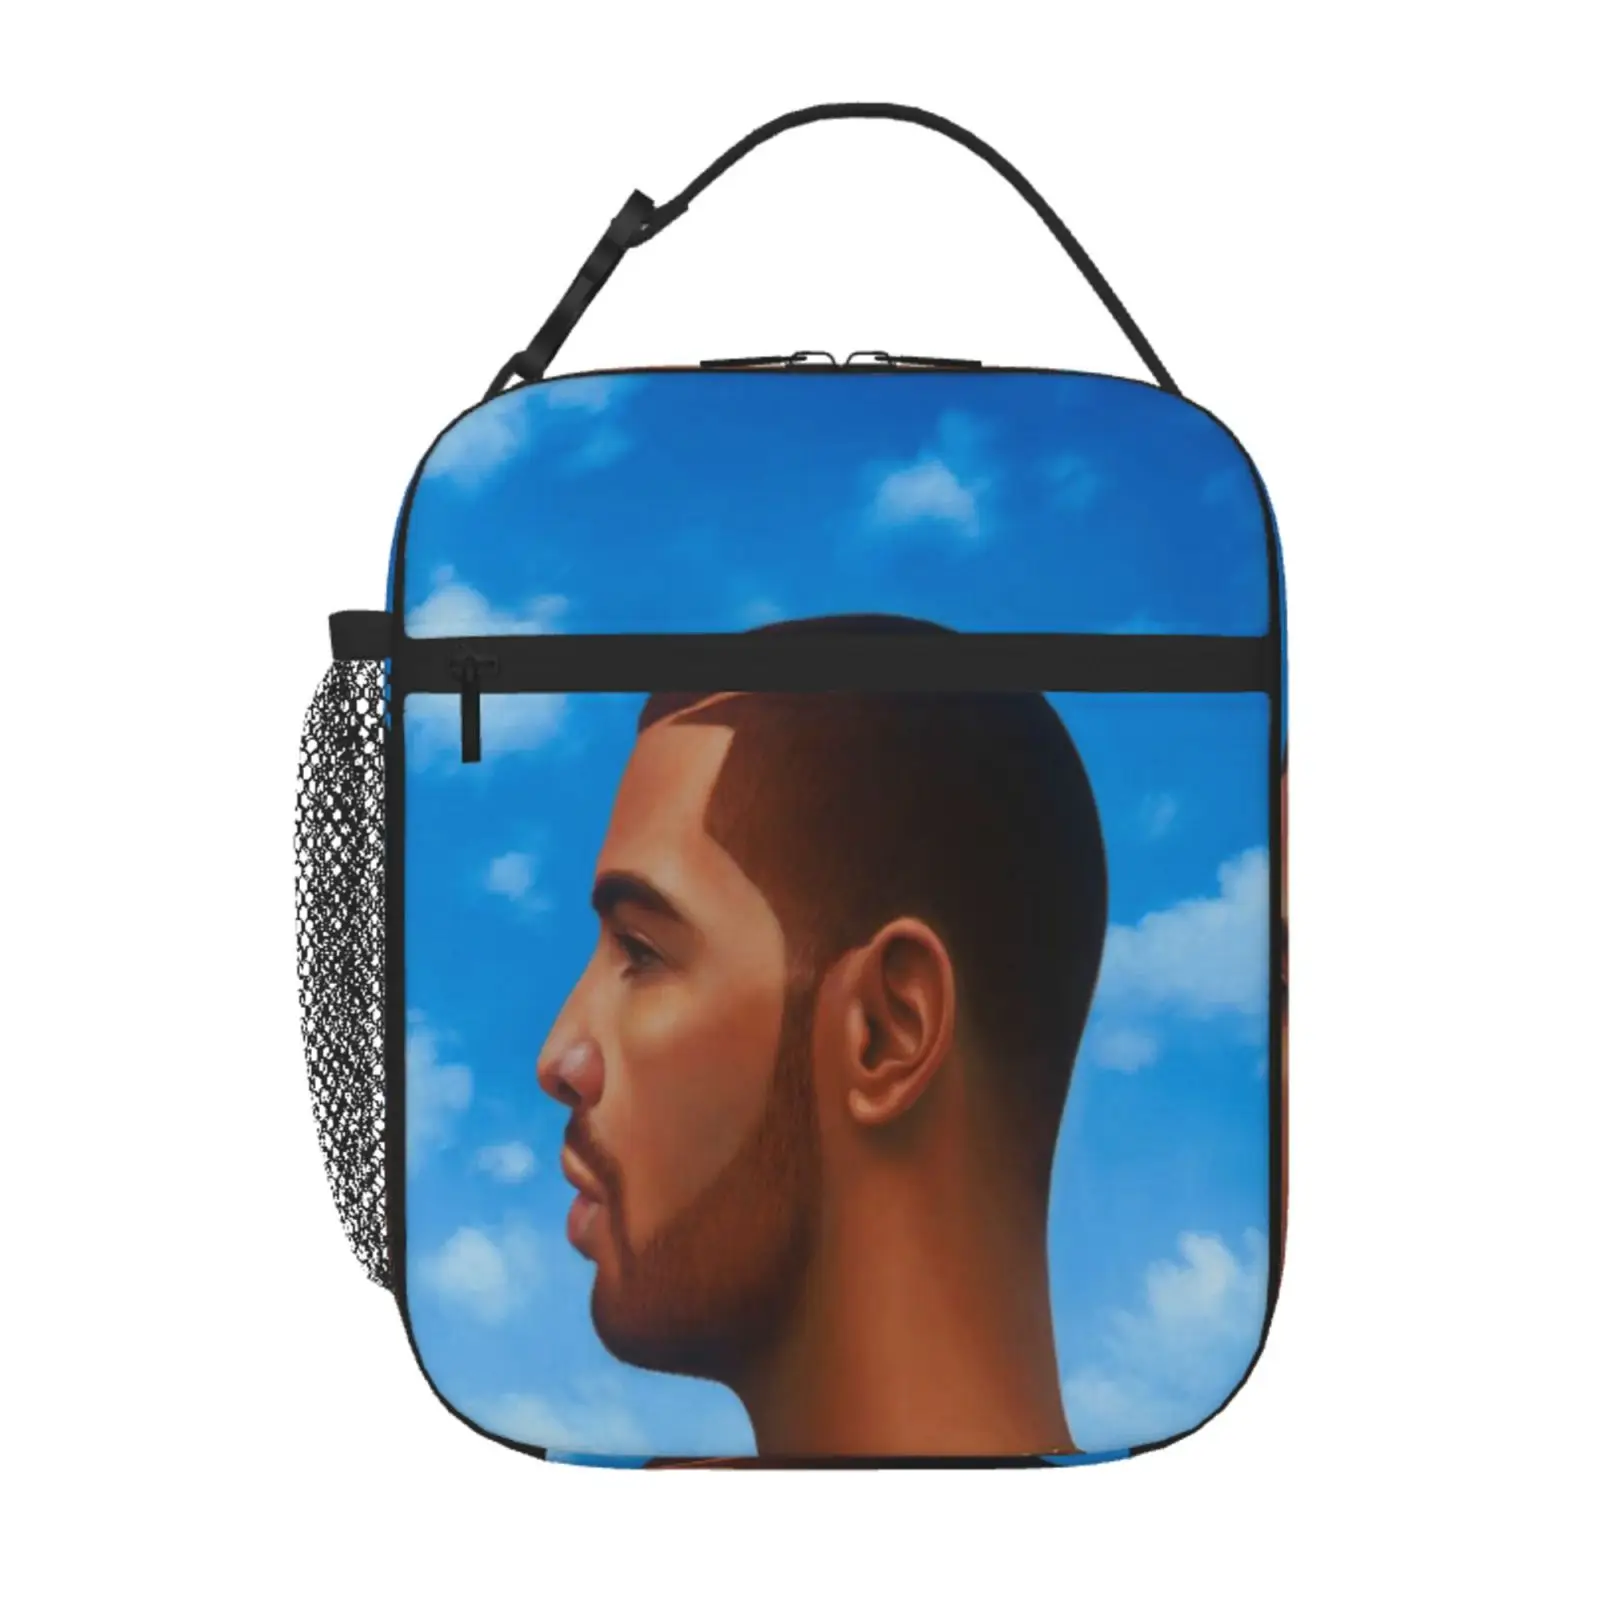 

Drake - Nothing Was The Same Lunch Bags For Women Kids Lunch Bag Small Thermal Bag